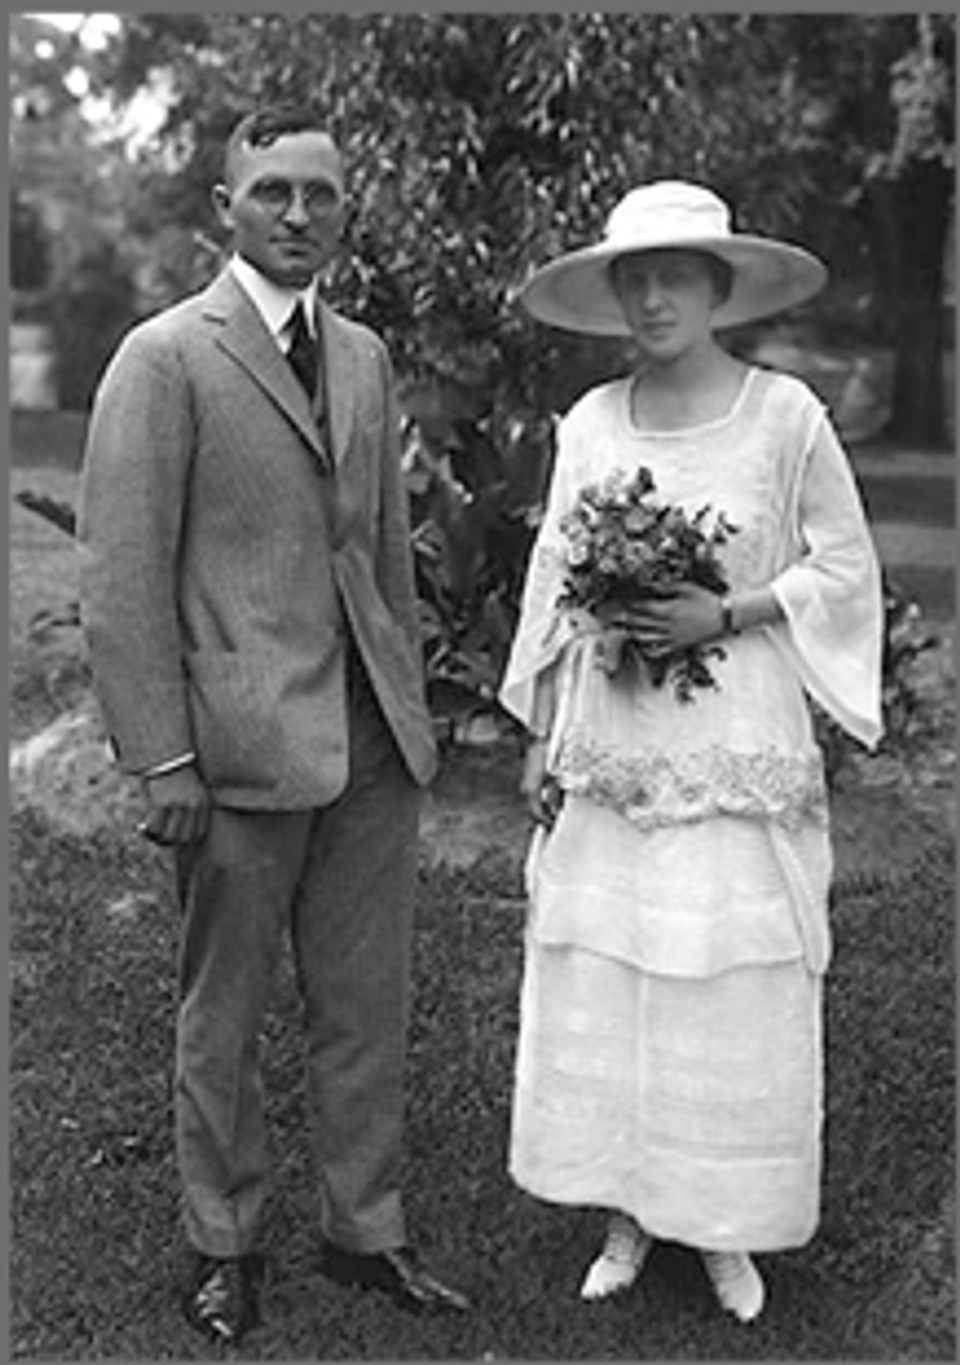 A photograph of Harry Truman and Bess Truman on their wedding day.